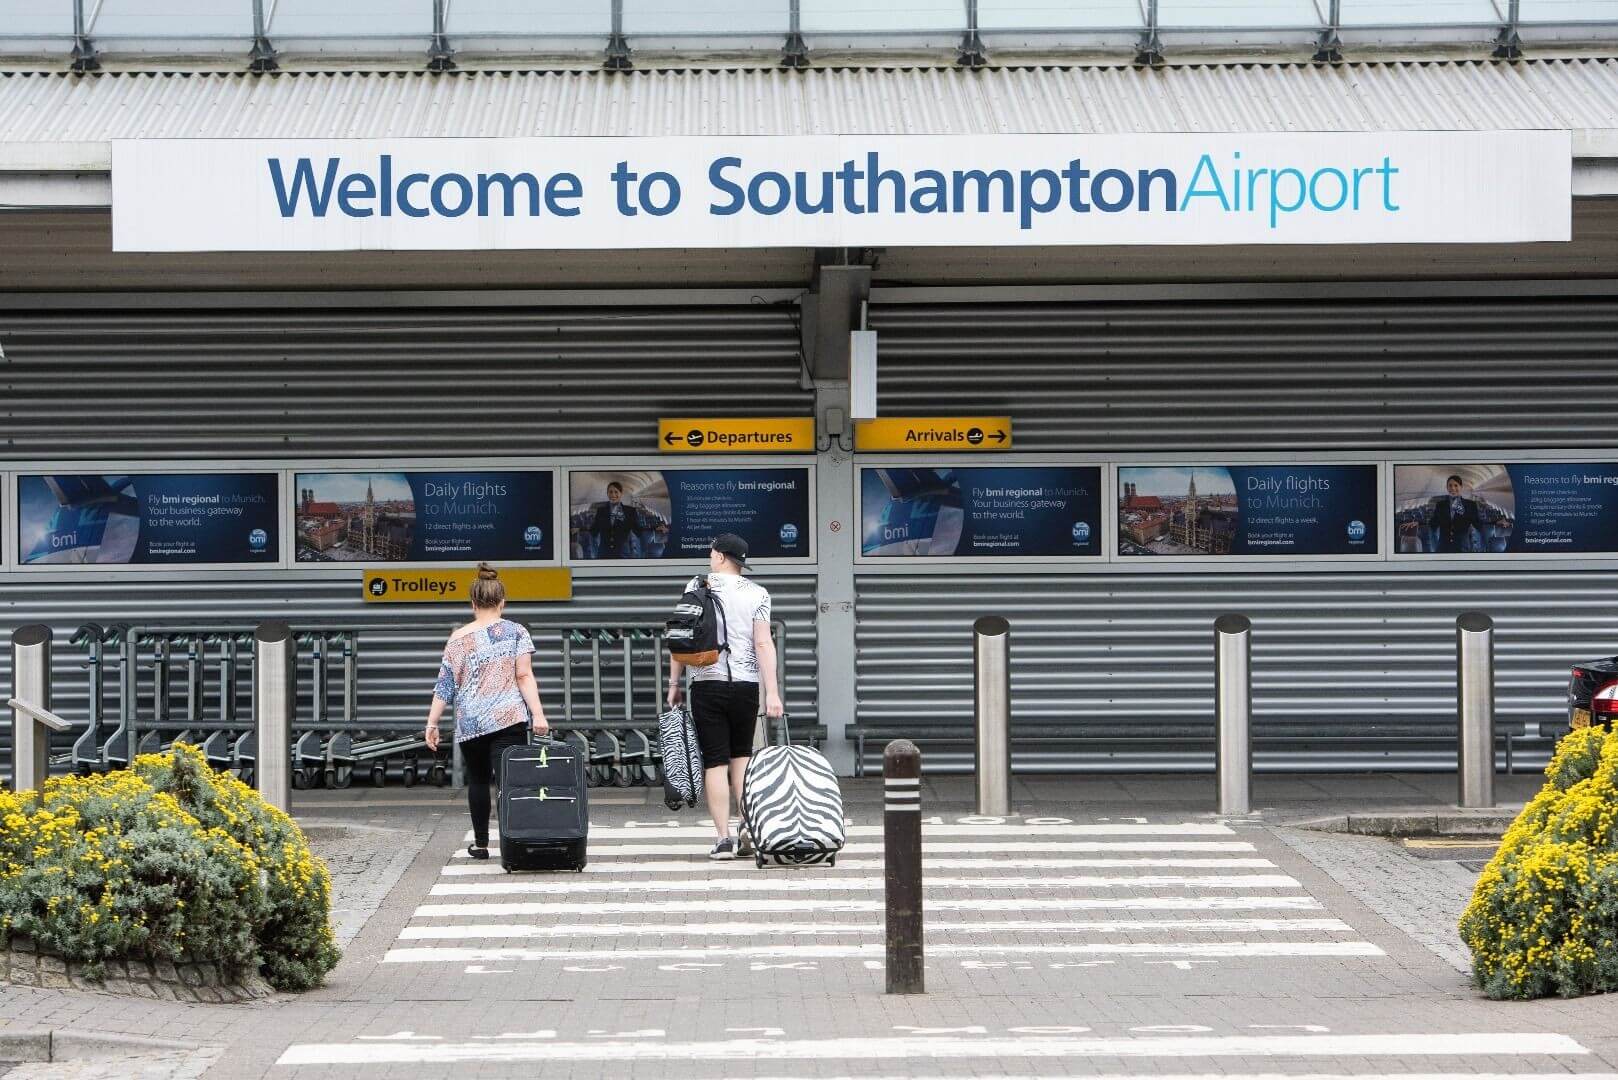 Southampton airport arrivals and departures